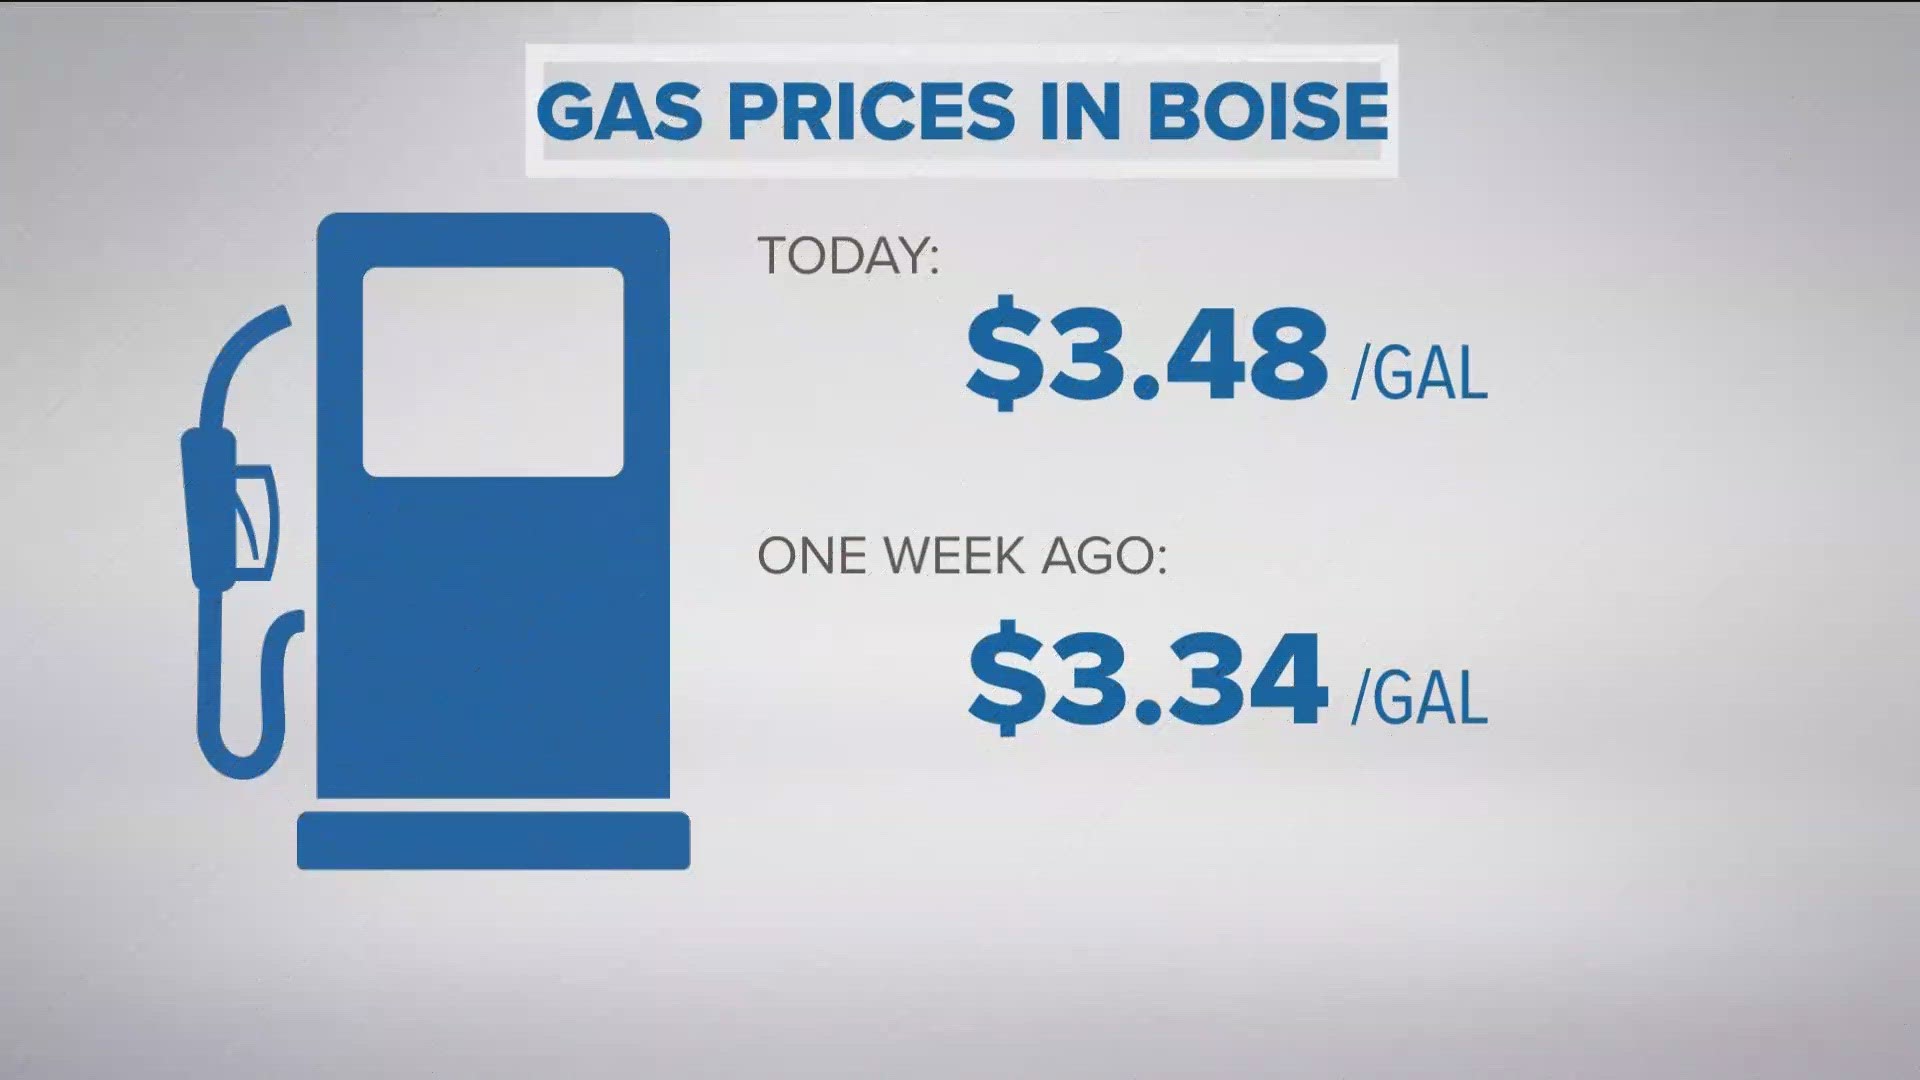 According to GasBuddy, the price for a gallon of unleaded gas is sitting around $3.48, as of Monday.